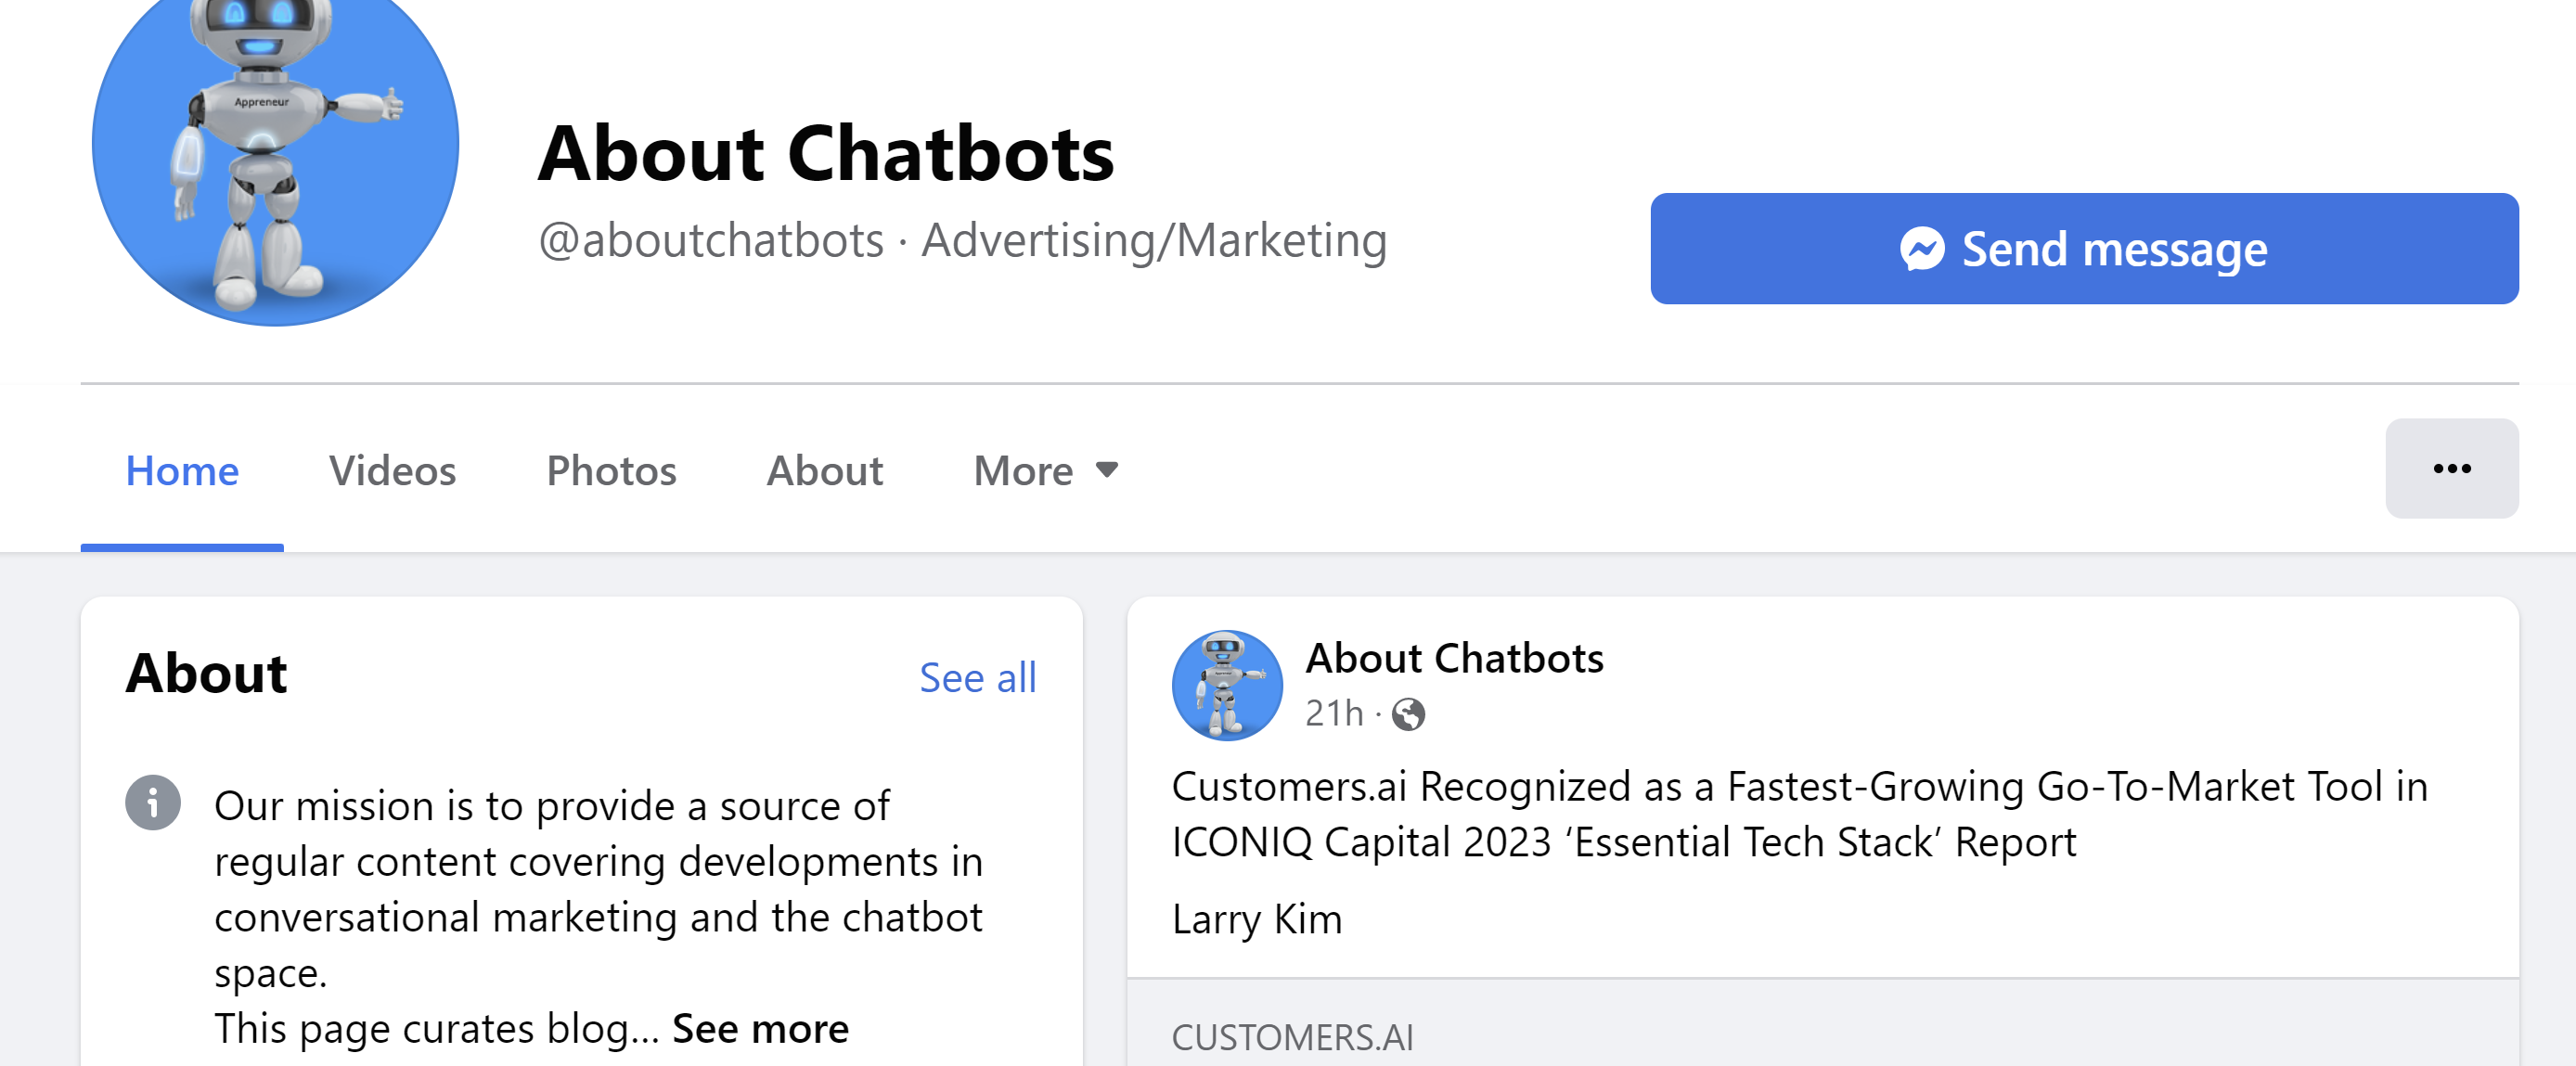 Screenshot of AboutChatbots, a bot available in Facebook Messenger